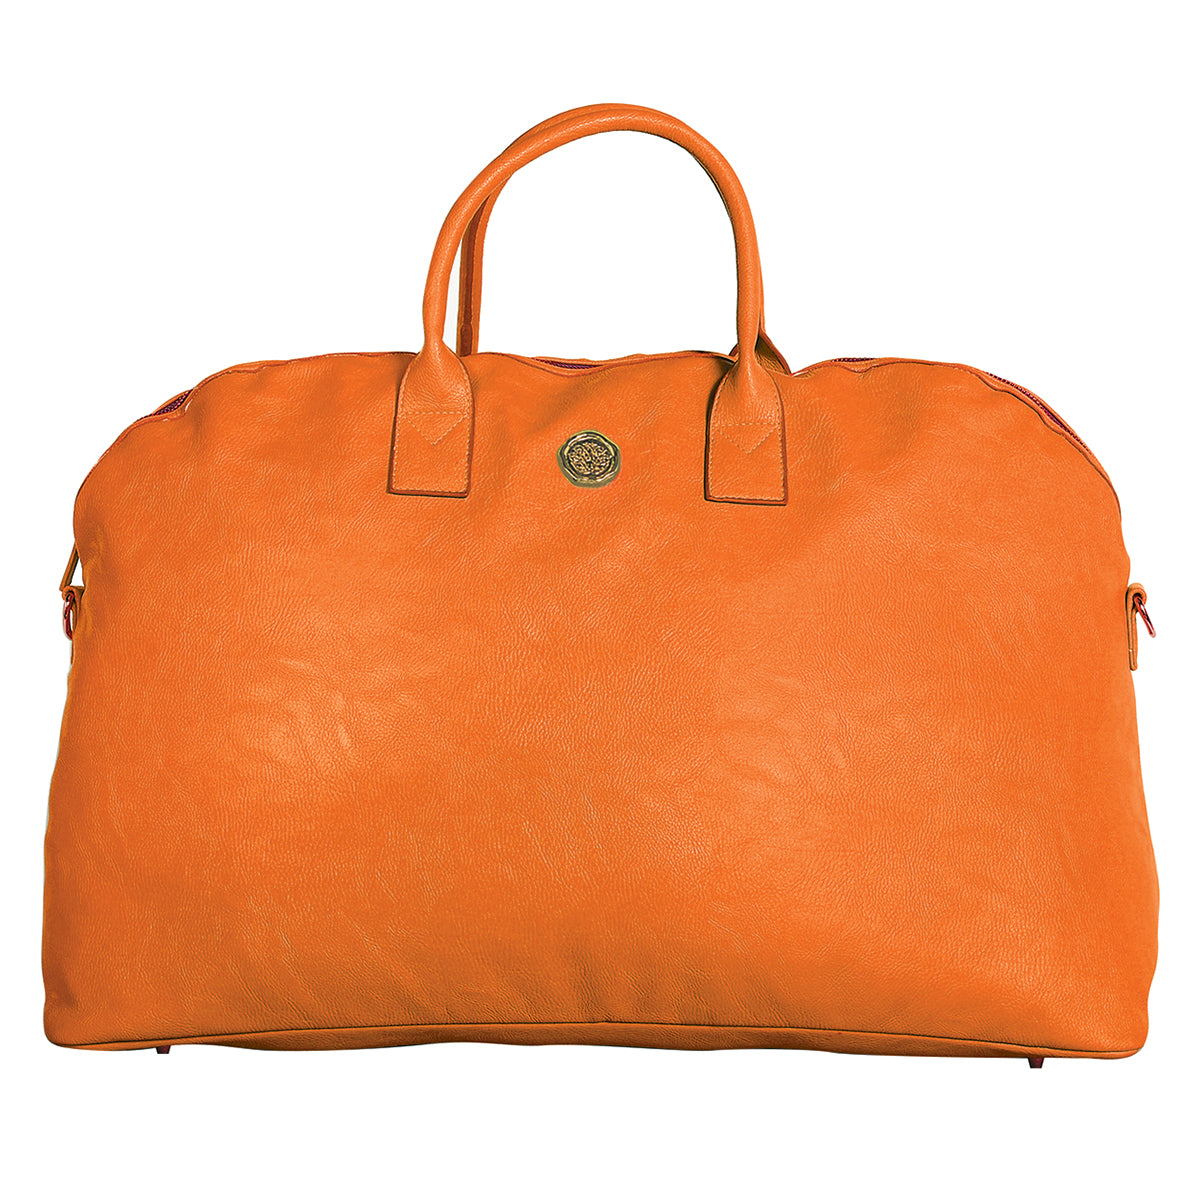 a large orange leather bag on a white background.